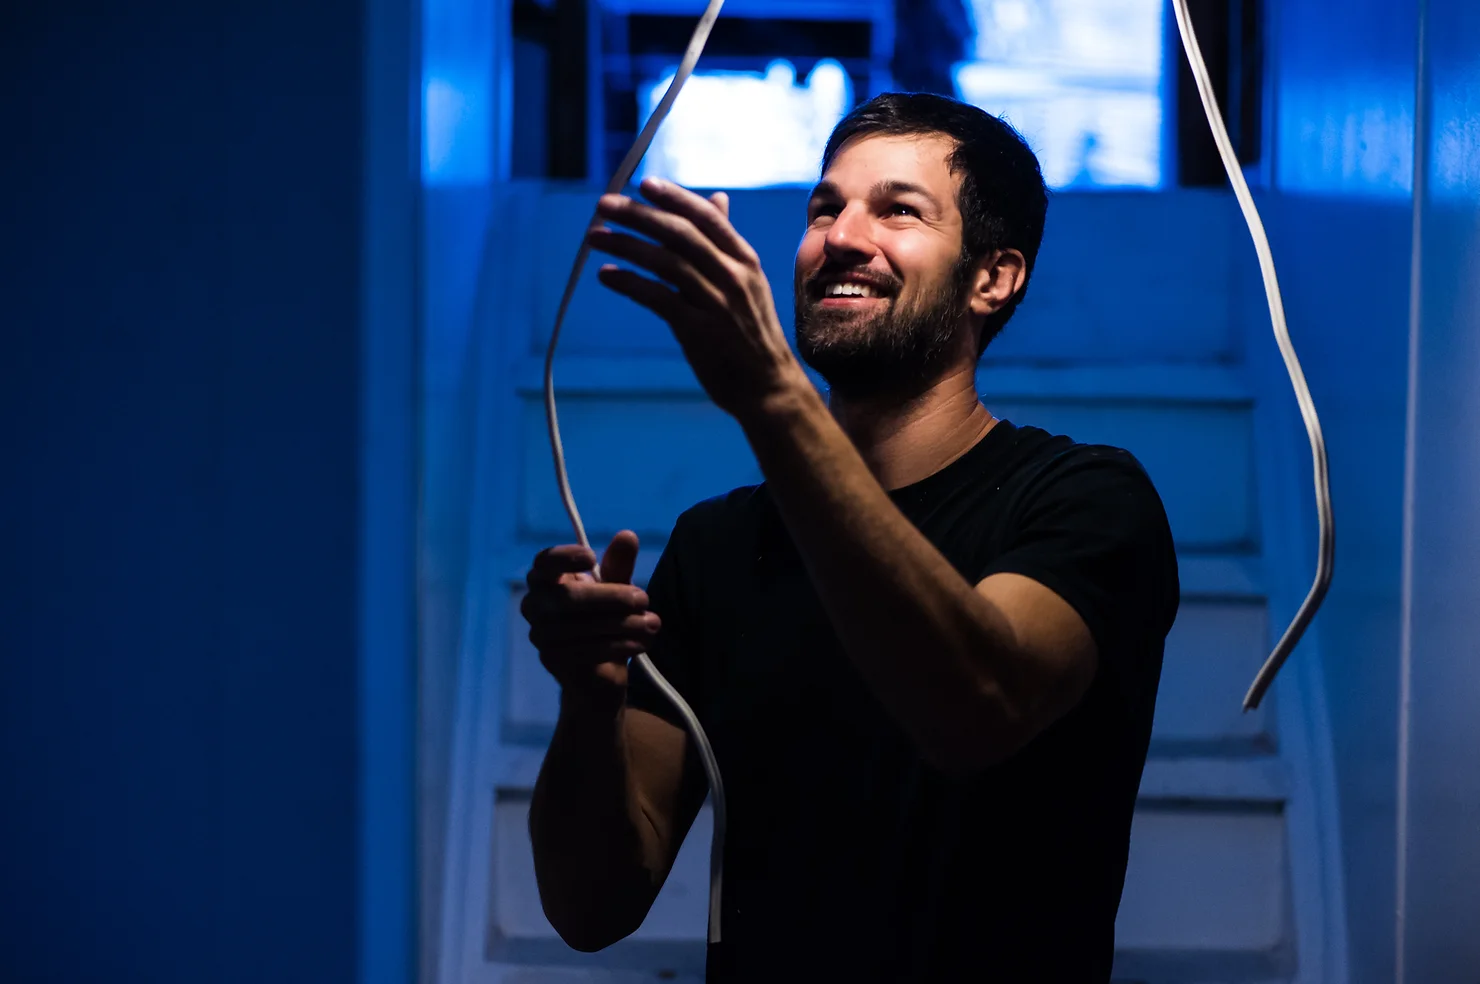 A smiling person is holding cables in a room with blue lighting. They appear engaged and happy, wearing a black shirt, against a dark background.